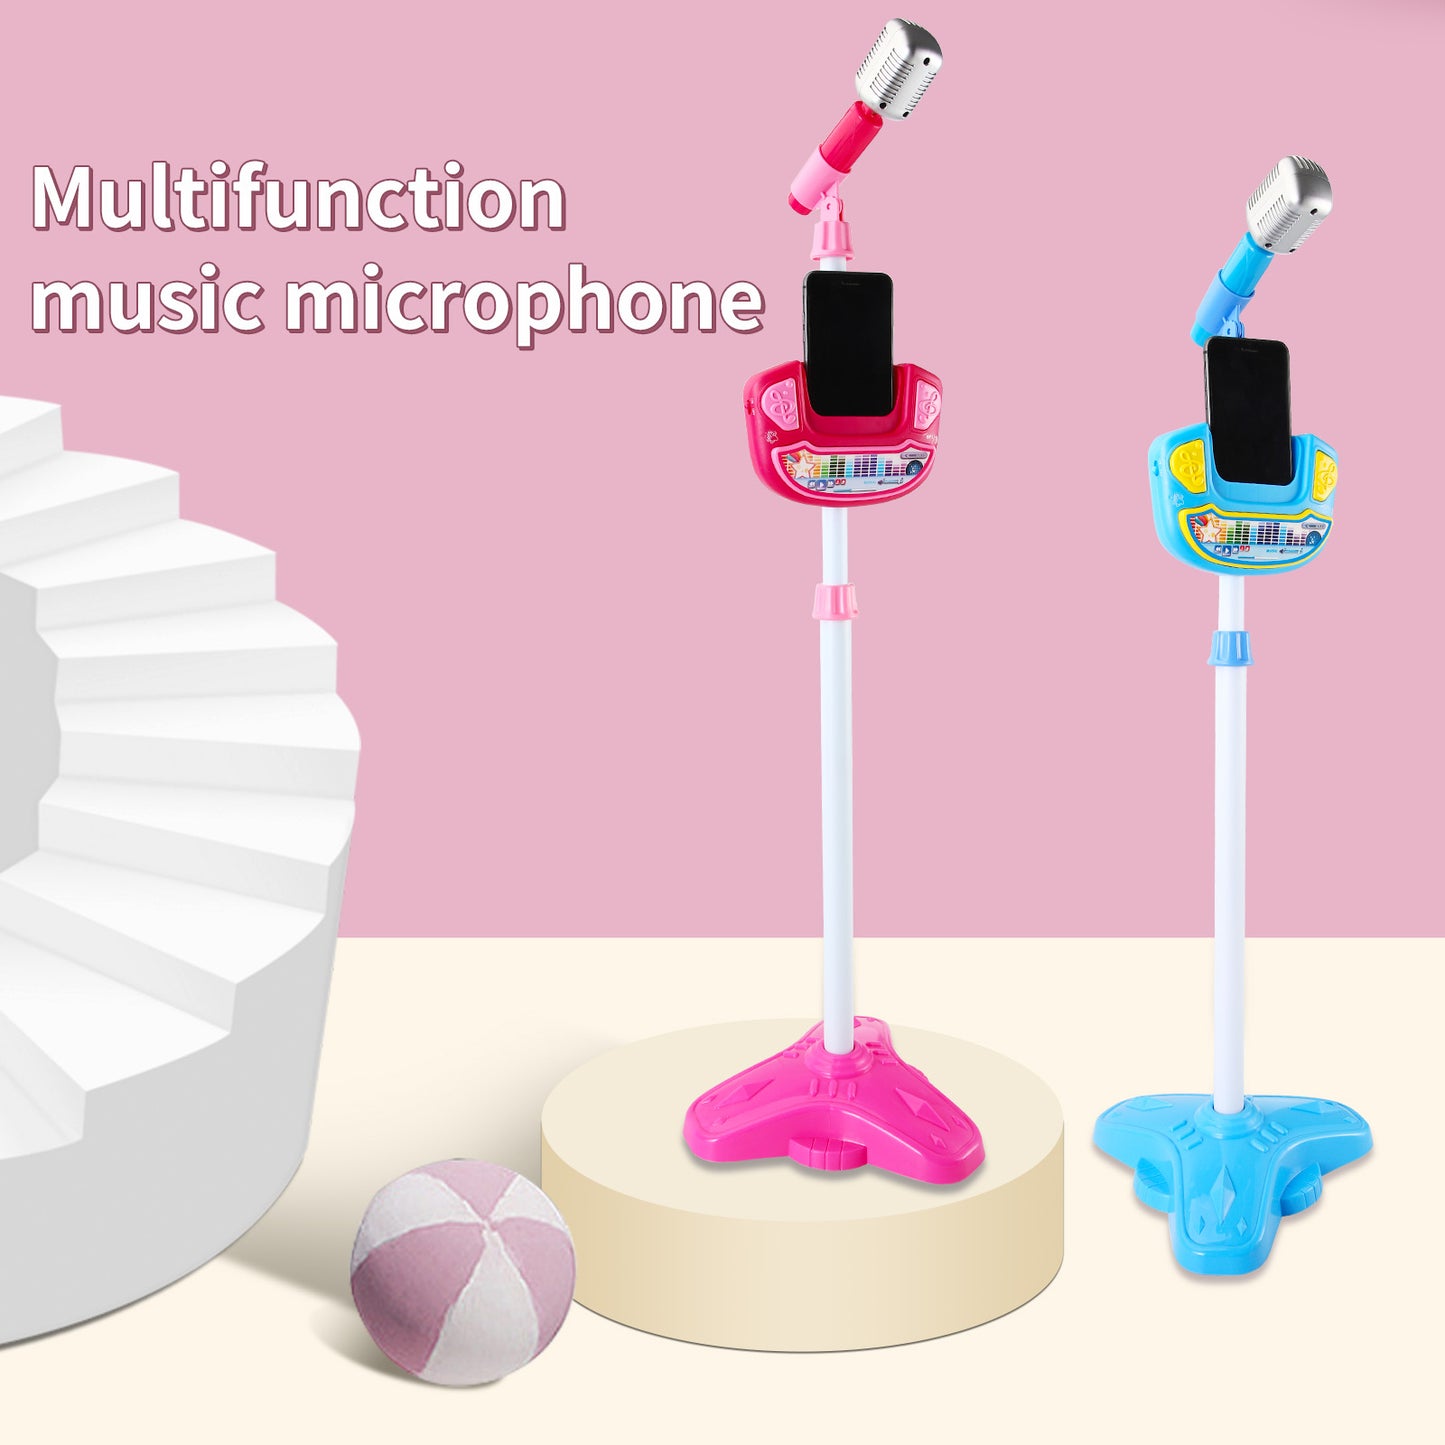 AOQIMITENJOY Musical Instrument Electronic Vertical Microphone Toys with Panel LED Lighting Children's Toys Birthday Gifts for Boys and Girls 3 Year Old+ HK-6017